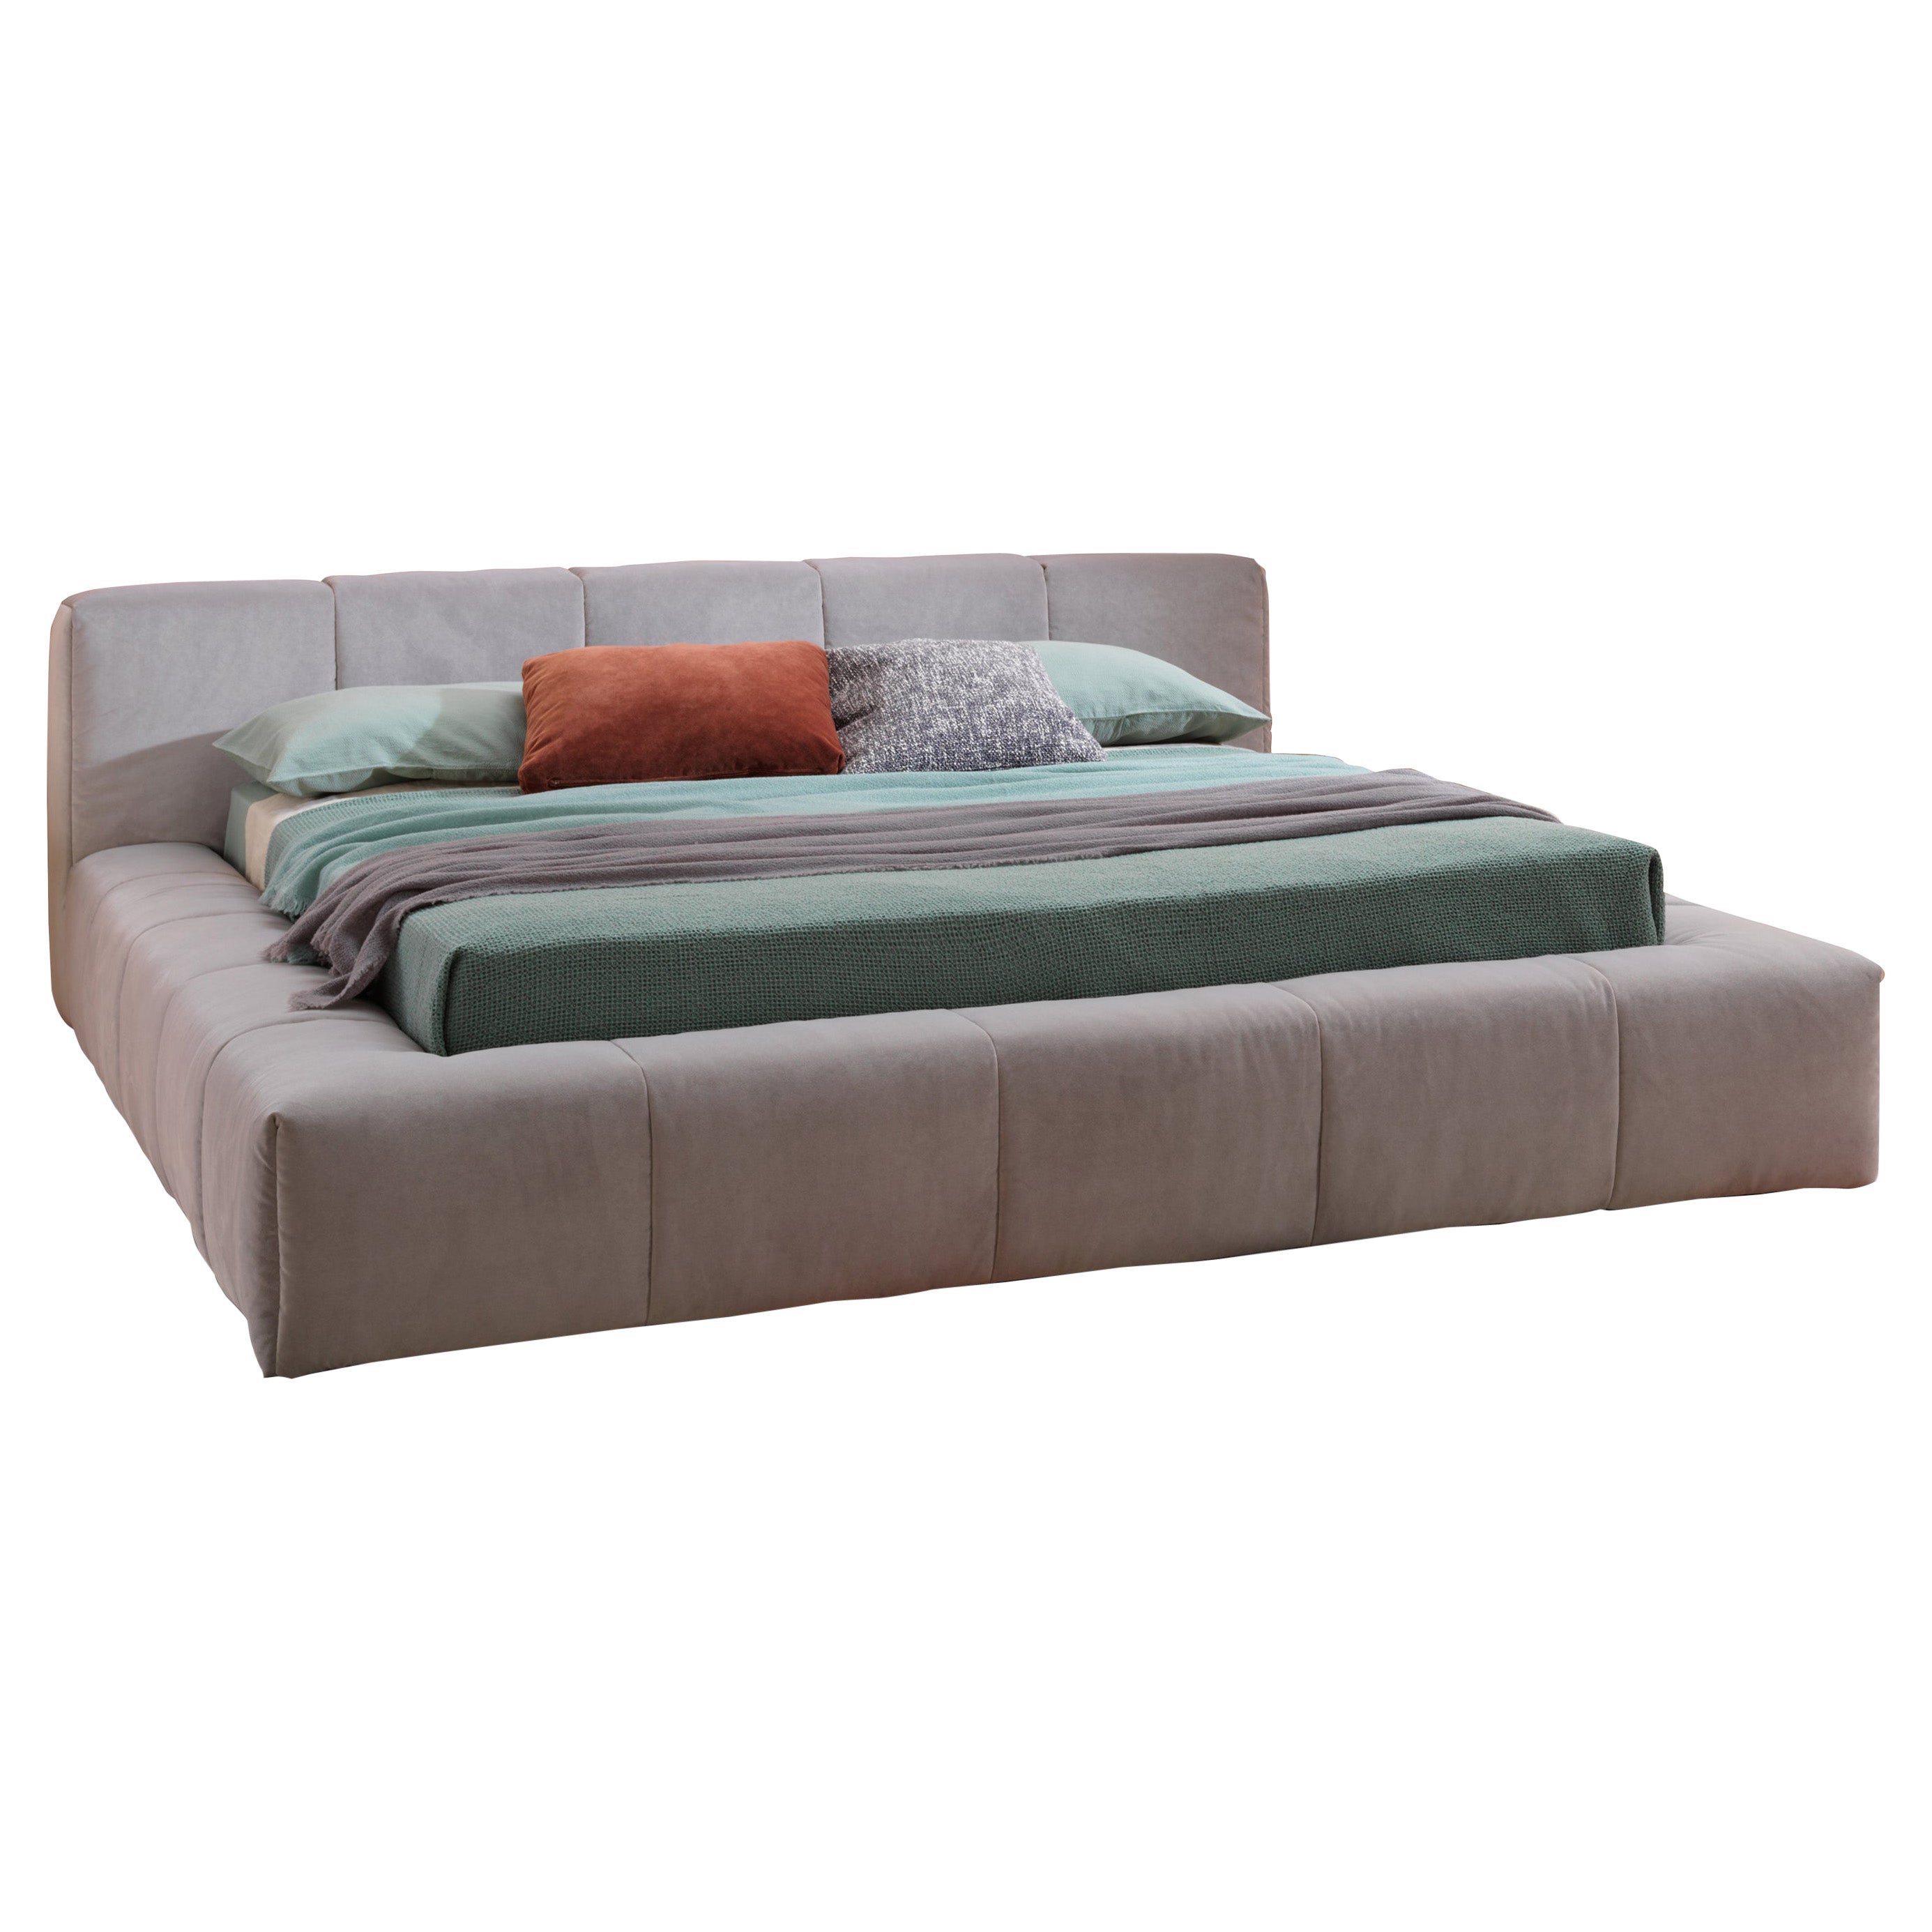 Pixel Box Large King Size Bed in Velvet Upholstery with Base by Sergio Bicego